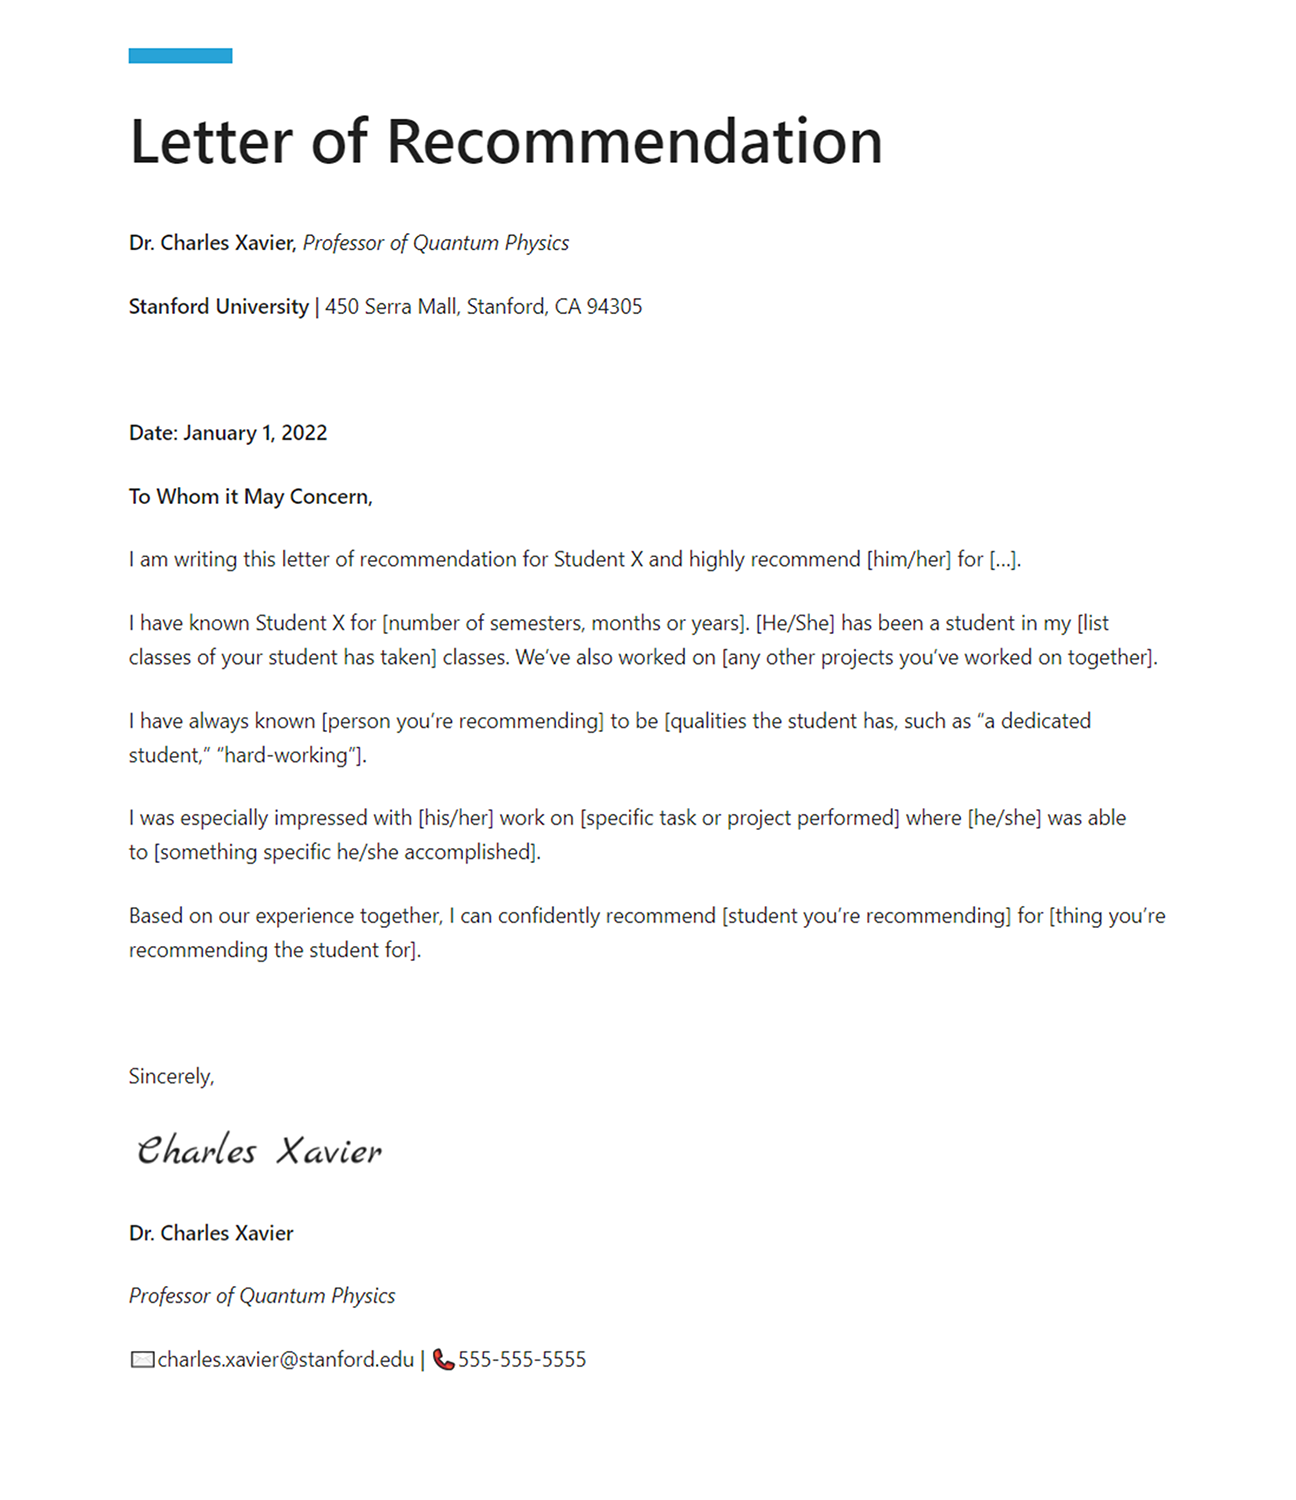 Recommendation letter template